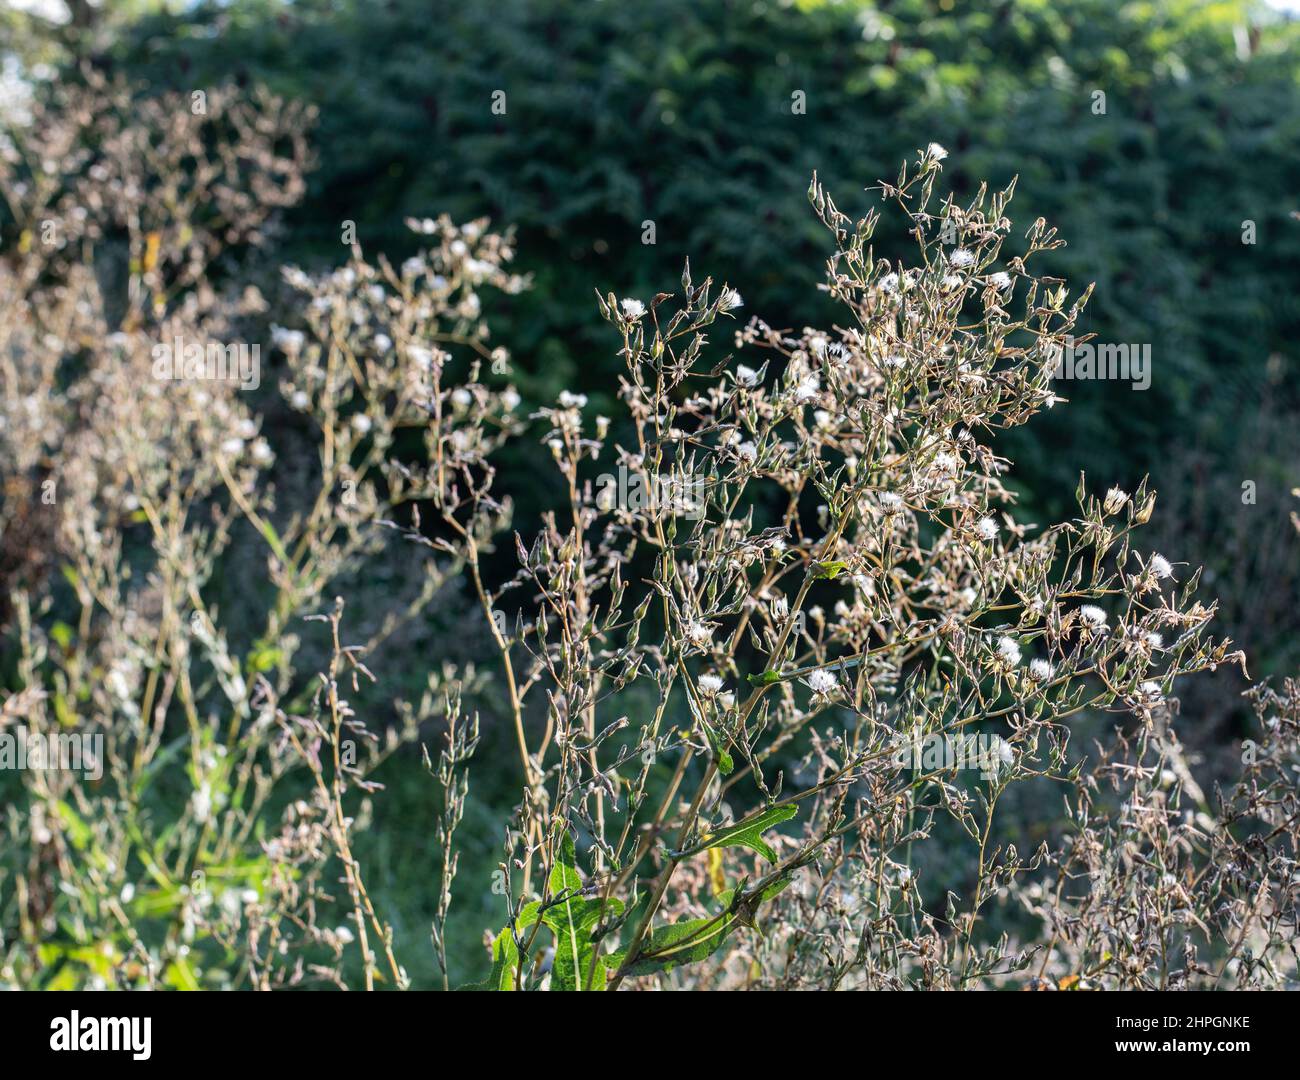 wilted narrow leaved hawksbeard plants with fluffy seeds in bright sunlight Stock Photo